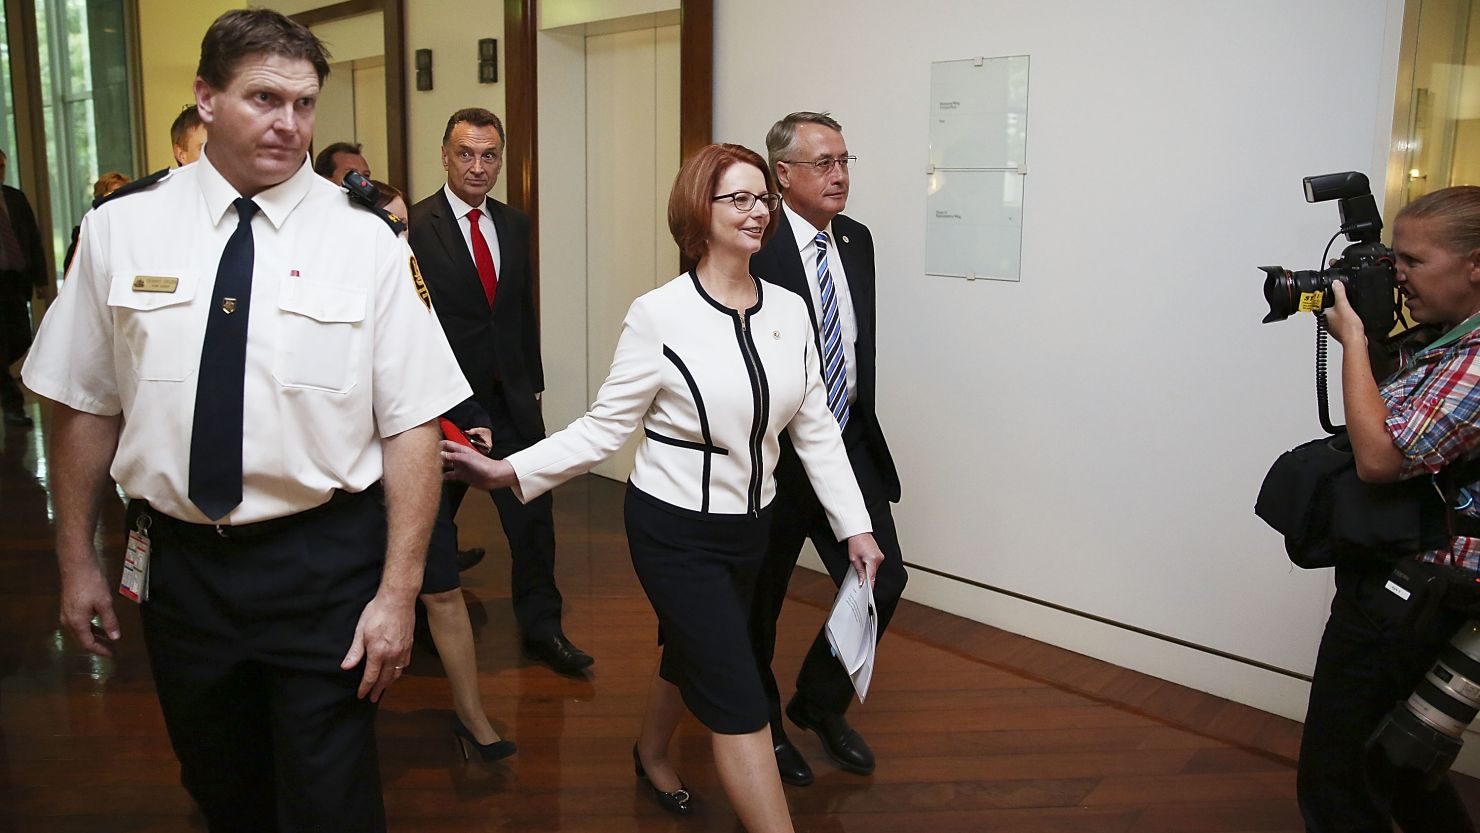 A number of opinion polls suggest the Labor Party is unlikely to win the next election with Julia Gillard at the helm.